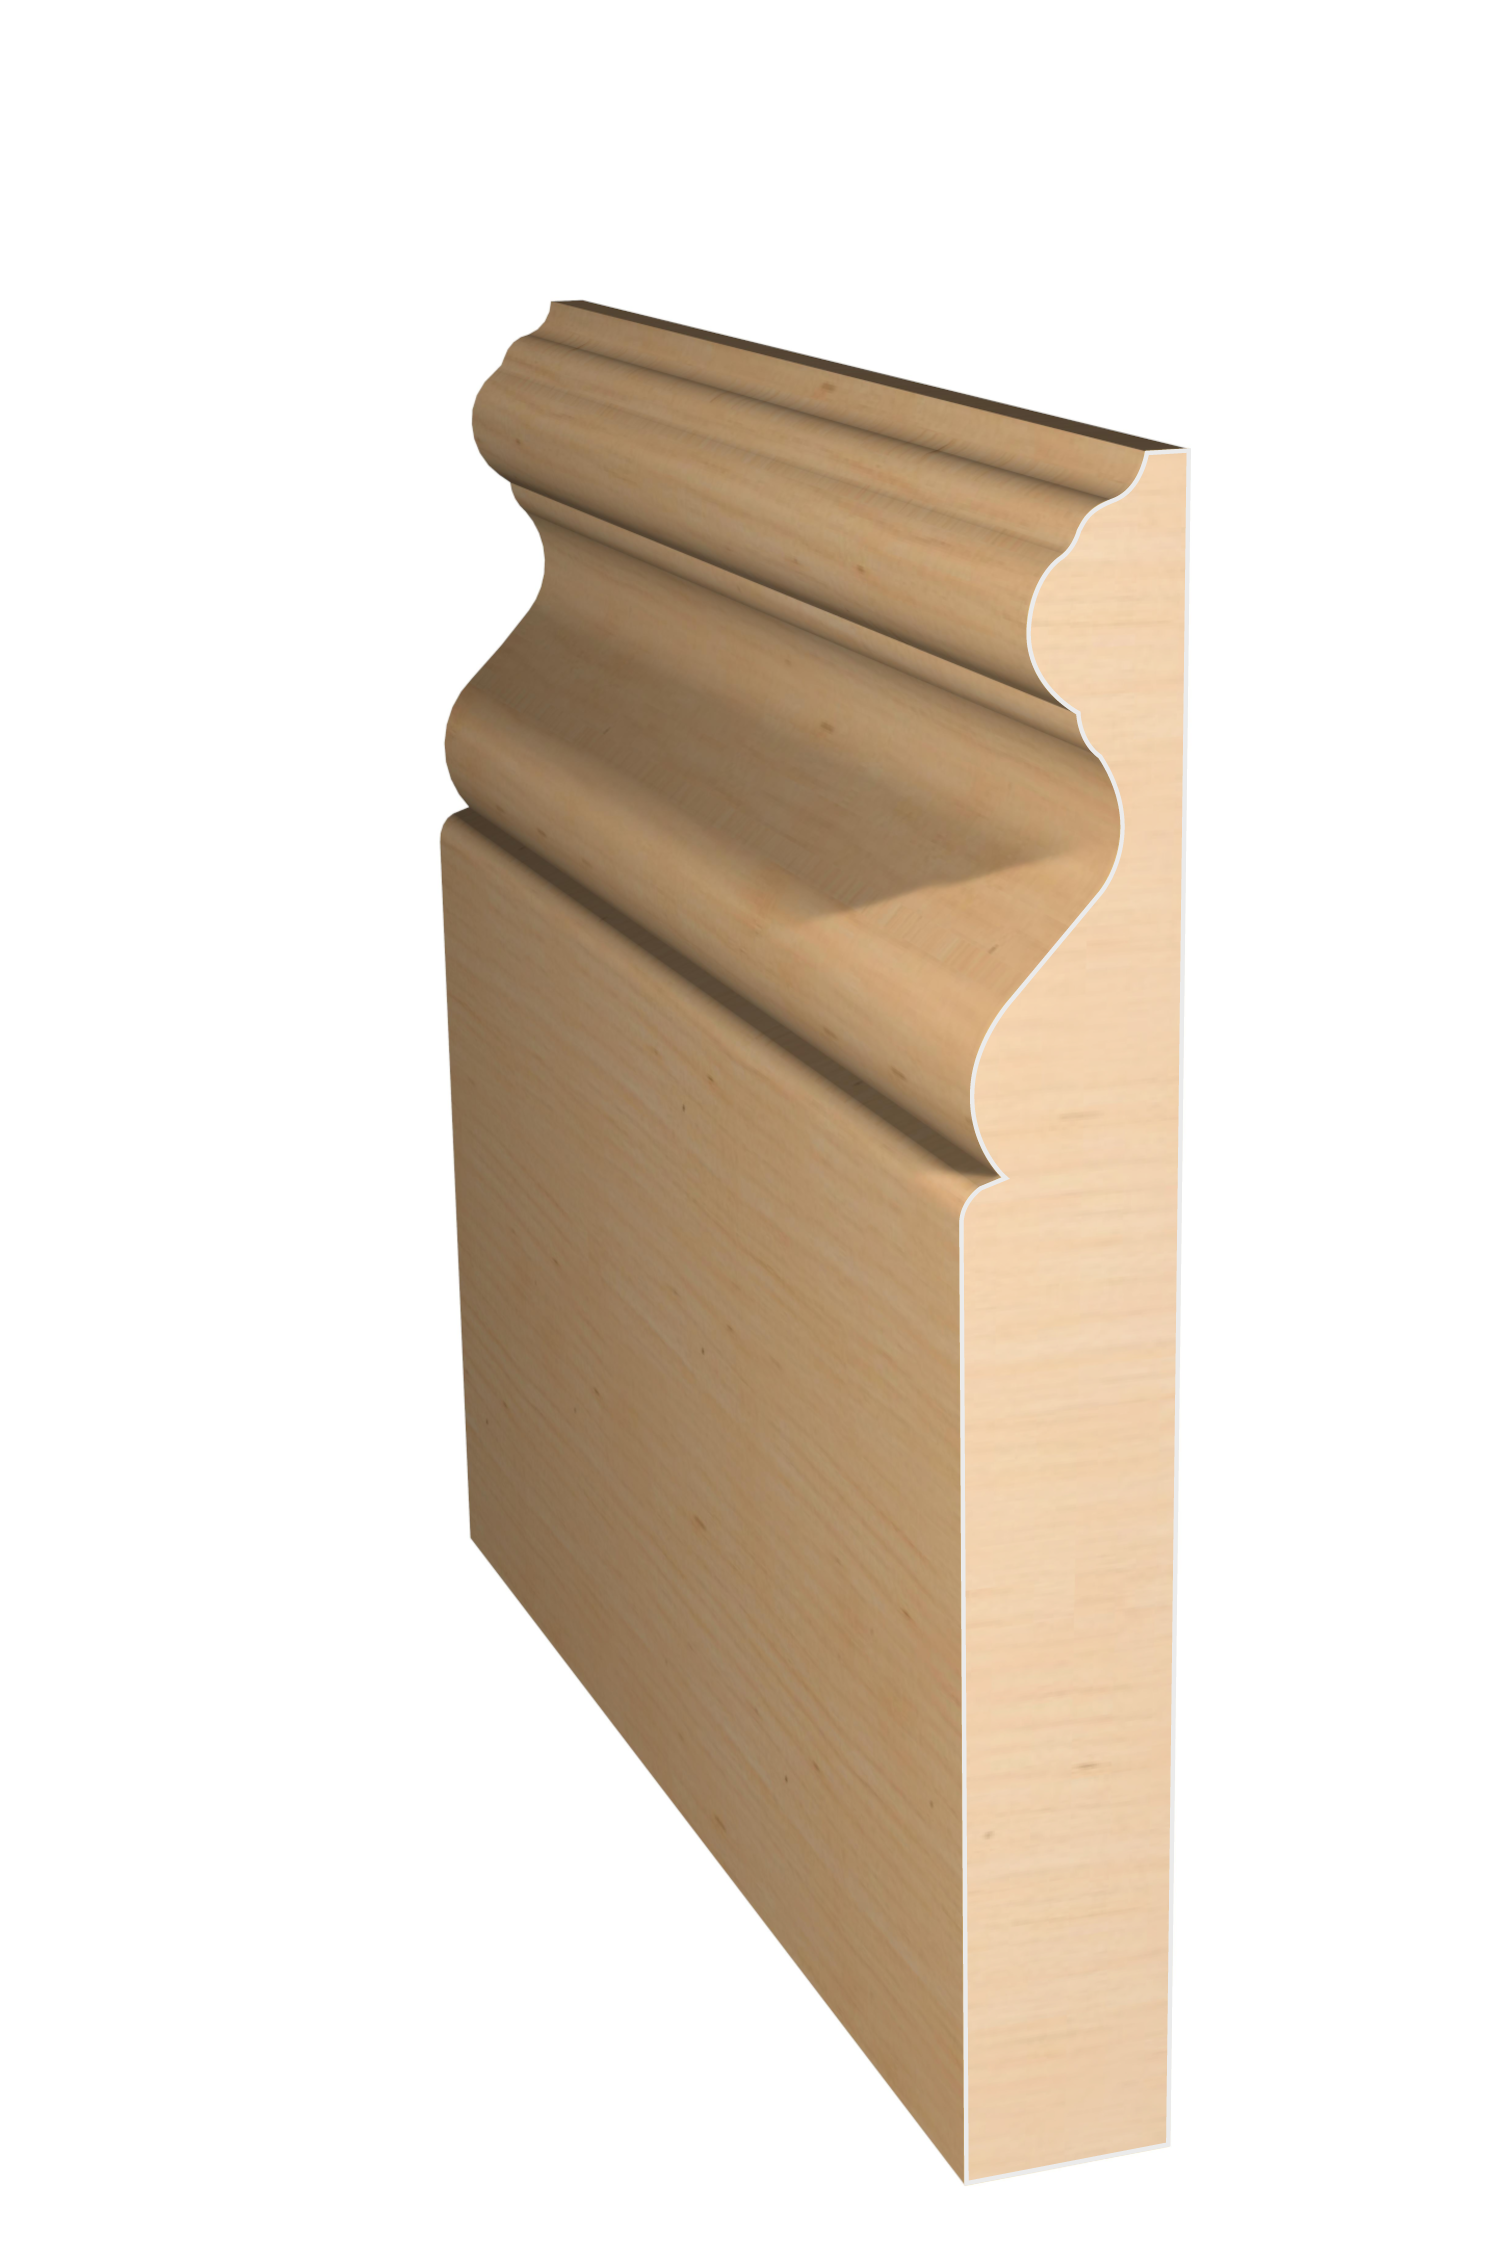 Three dimensional rendering of custom base wood molding BAPL51427 made by Public Lumber Company in Detroit.